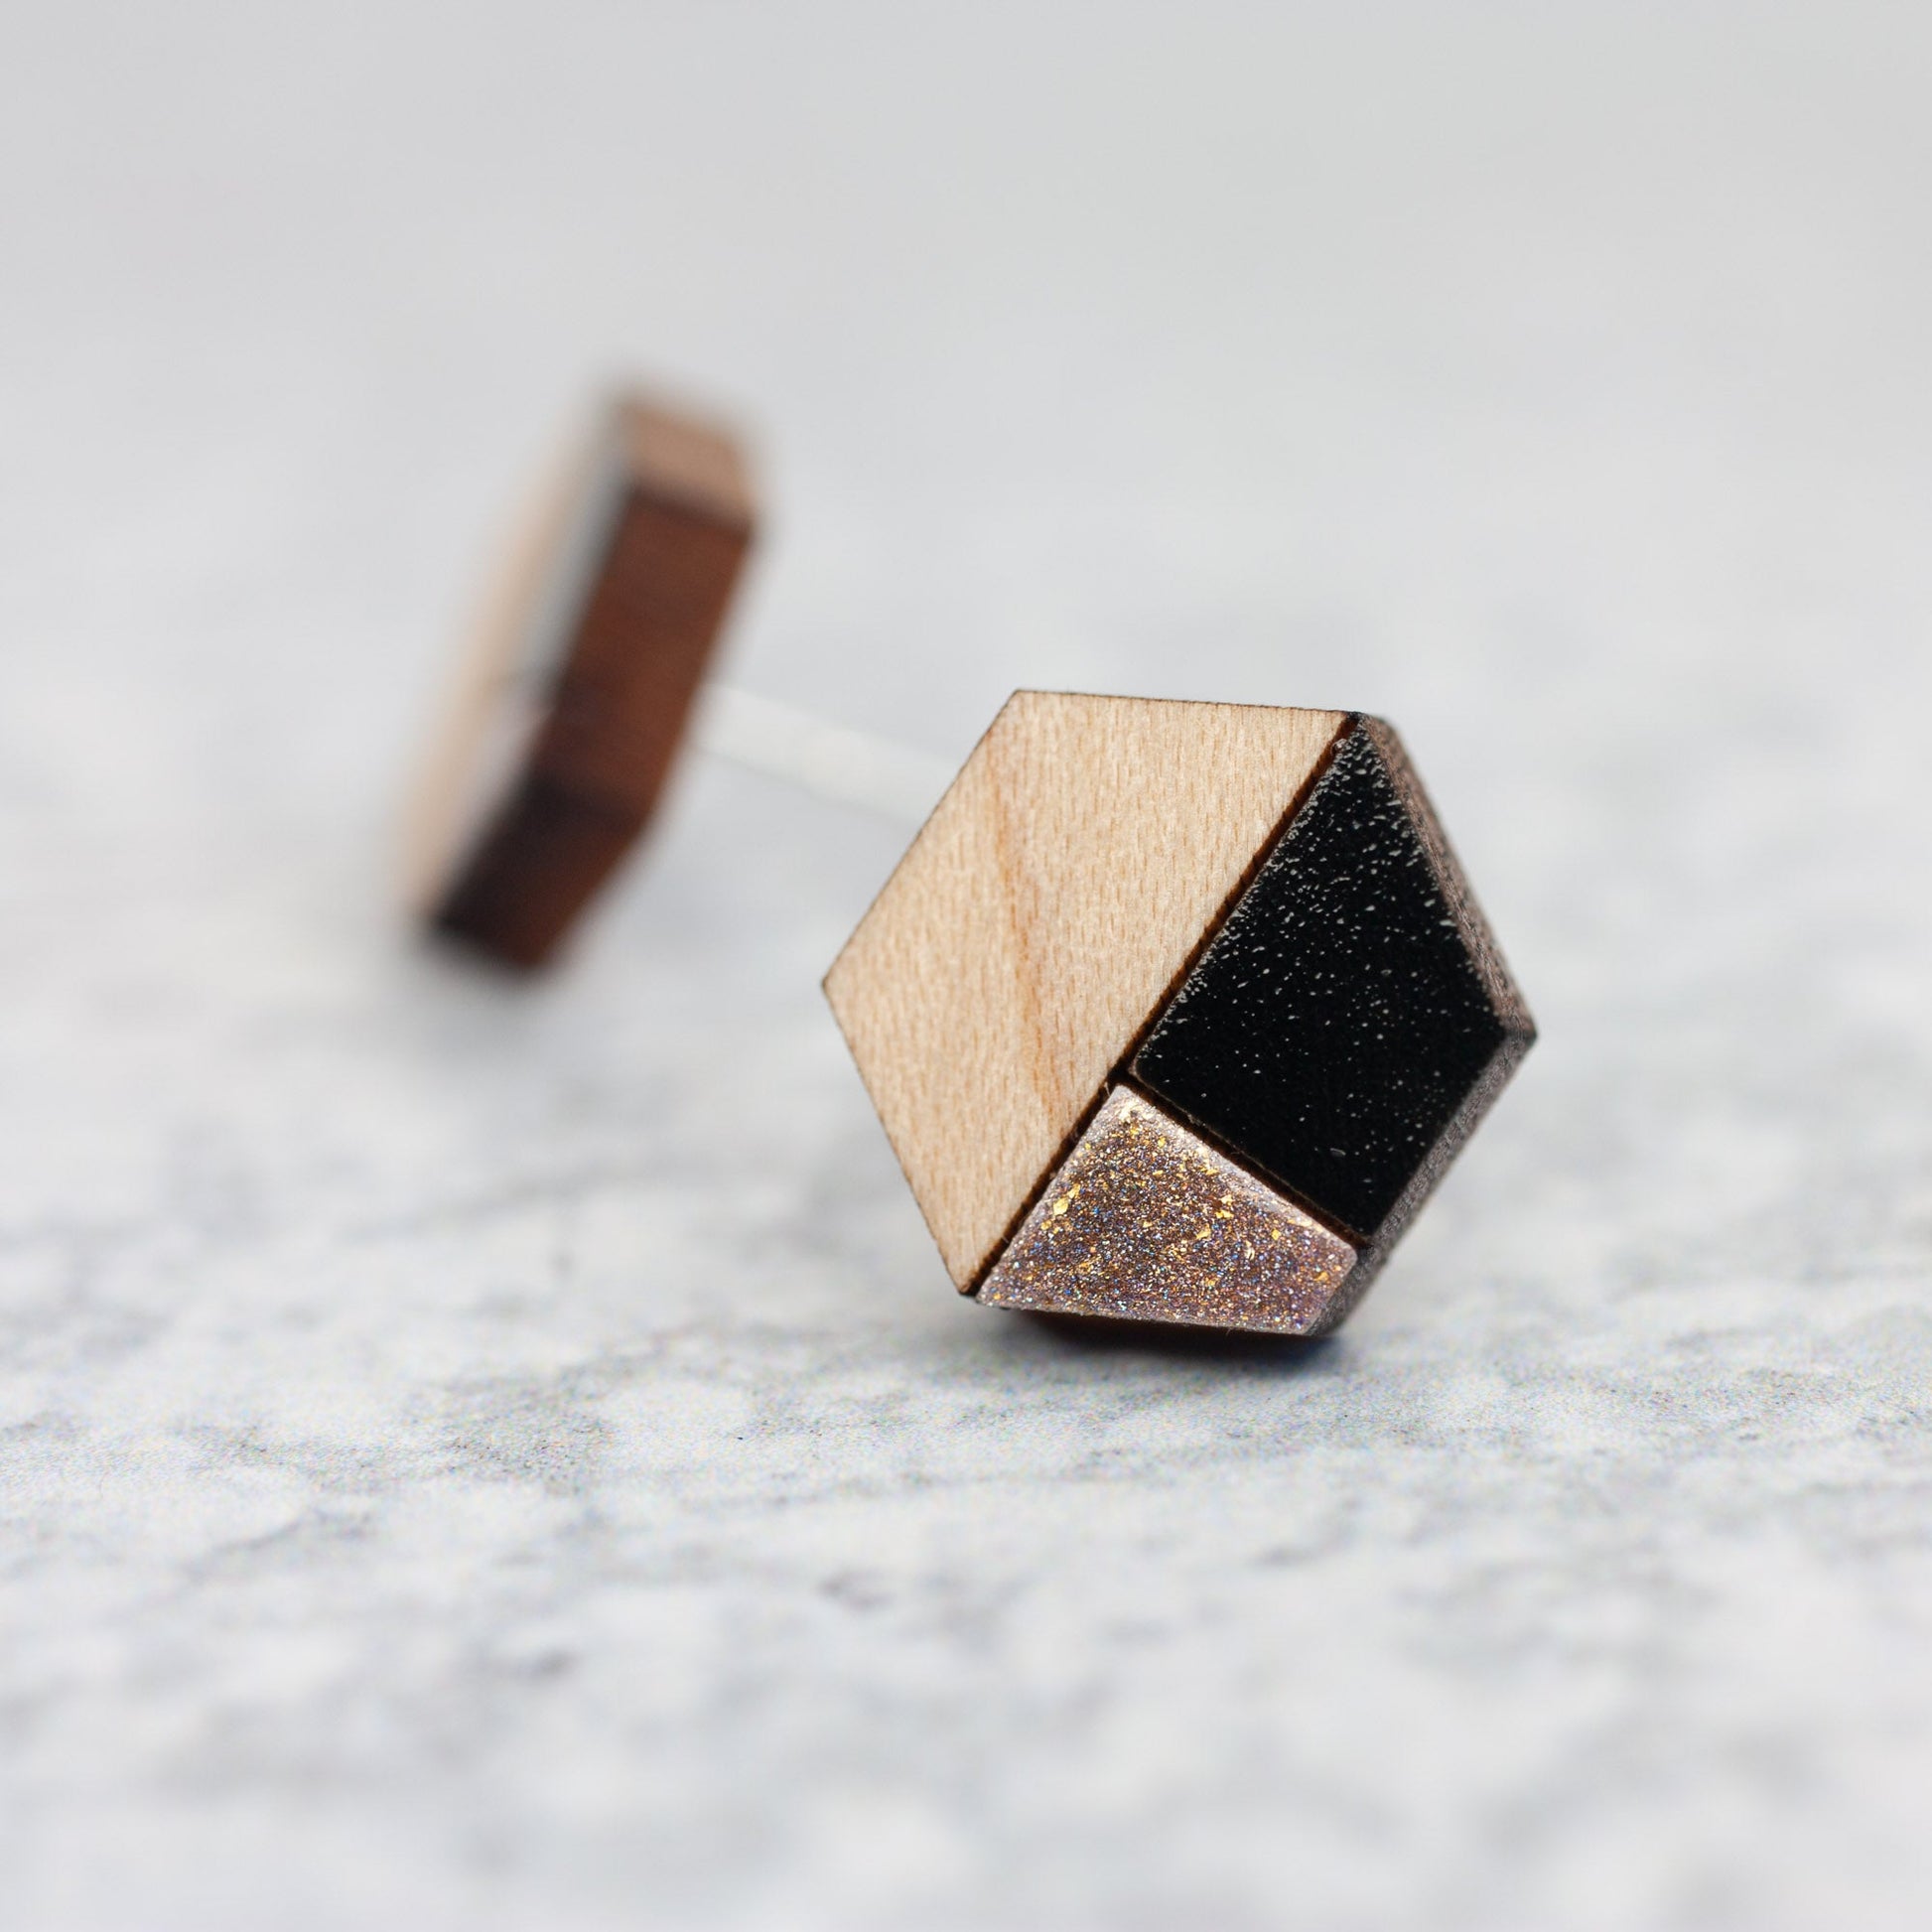 Wooden Laser Cut Earrings - Maple with Gold and Black Bauhaus Hexagon - by LeeMo Designs in Bend, Oregon